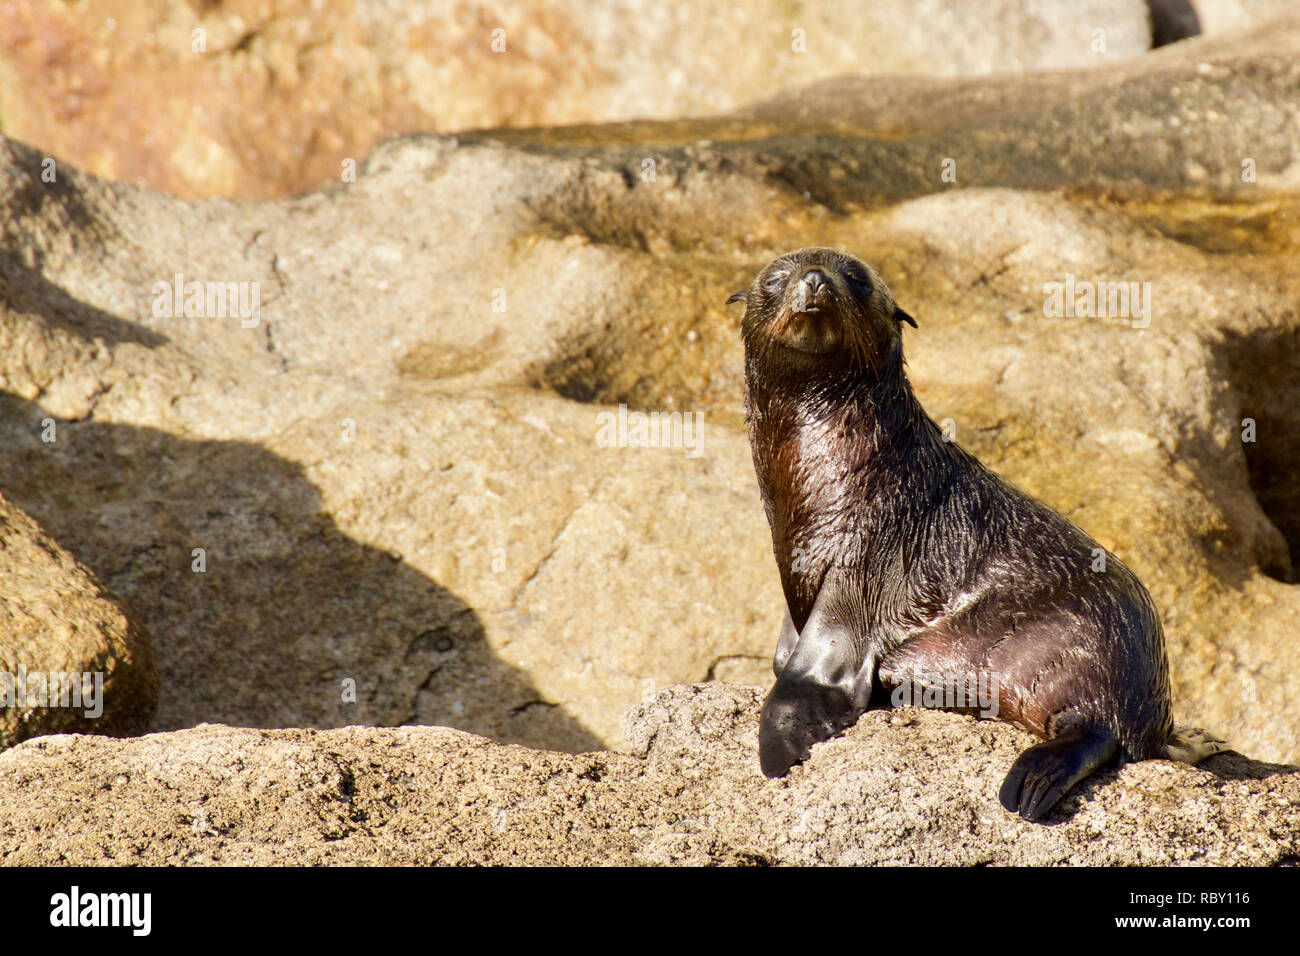 Young Sealion Pup on a rock, wet from a swim on remote island Stock Photo